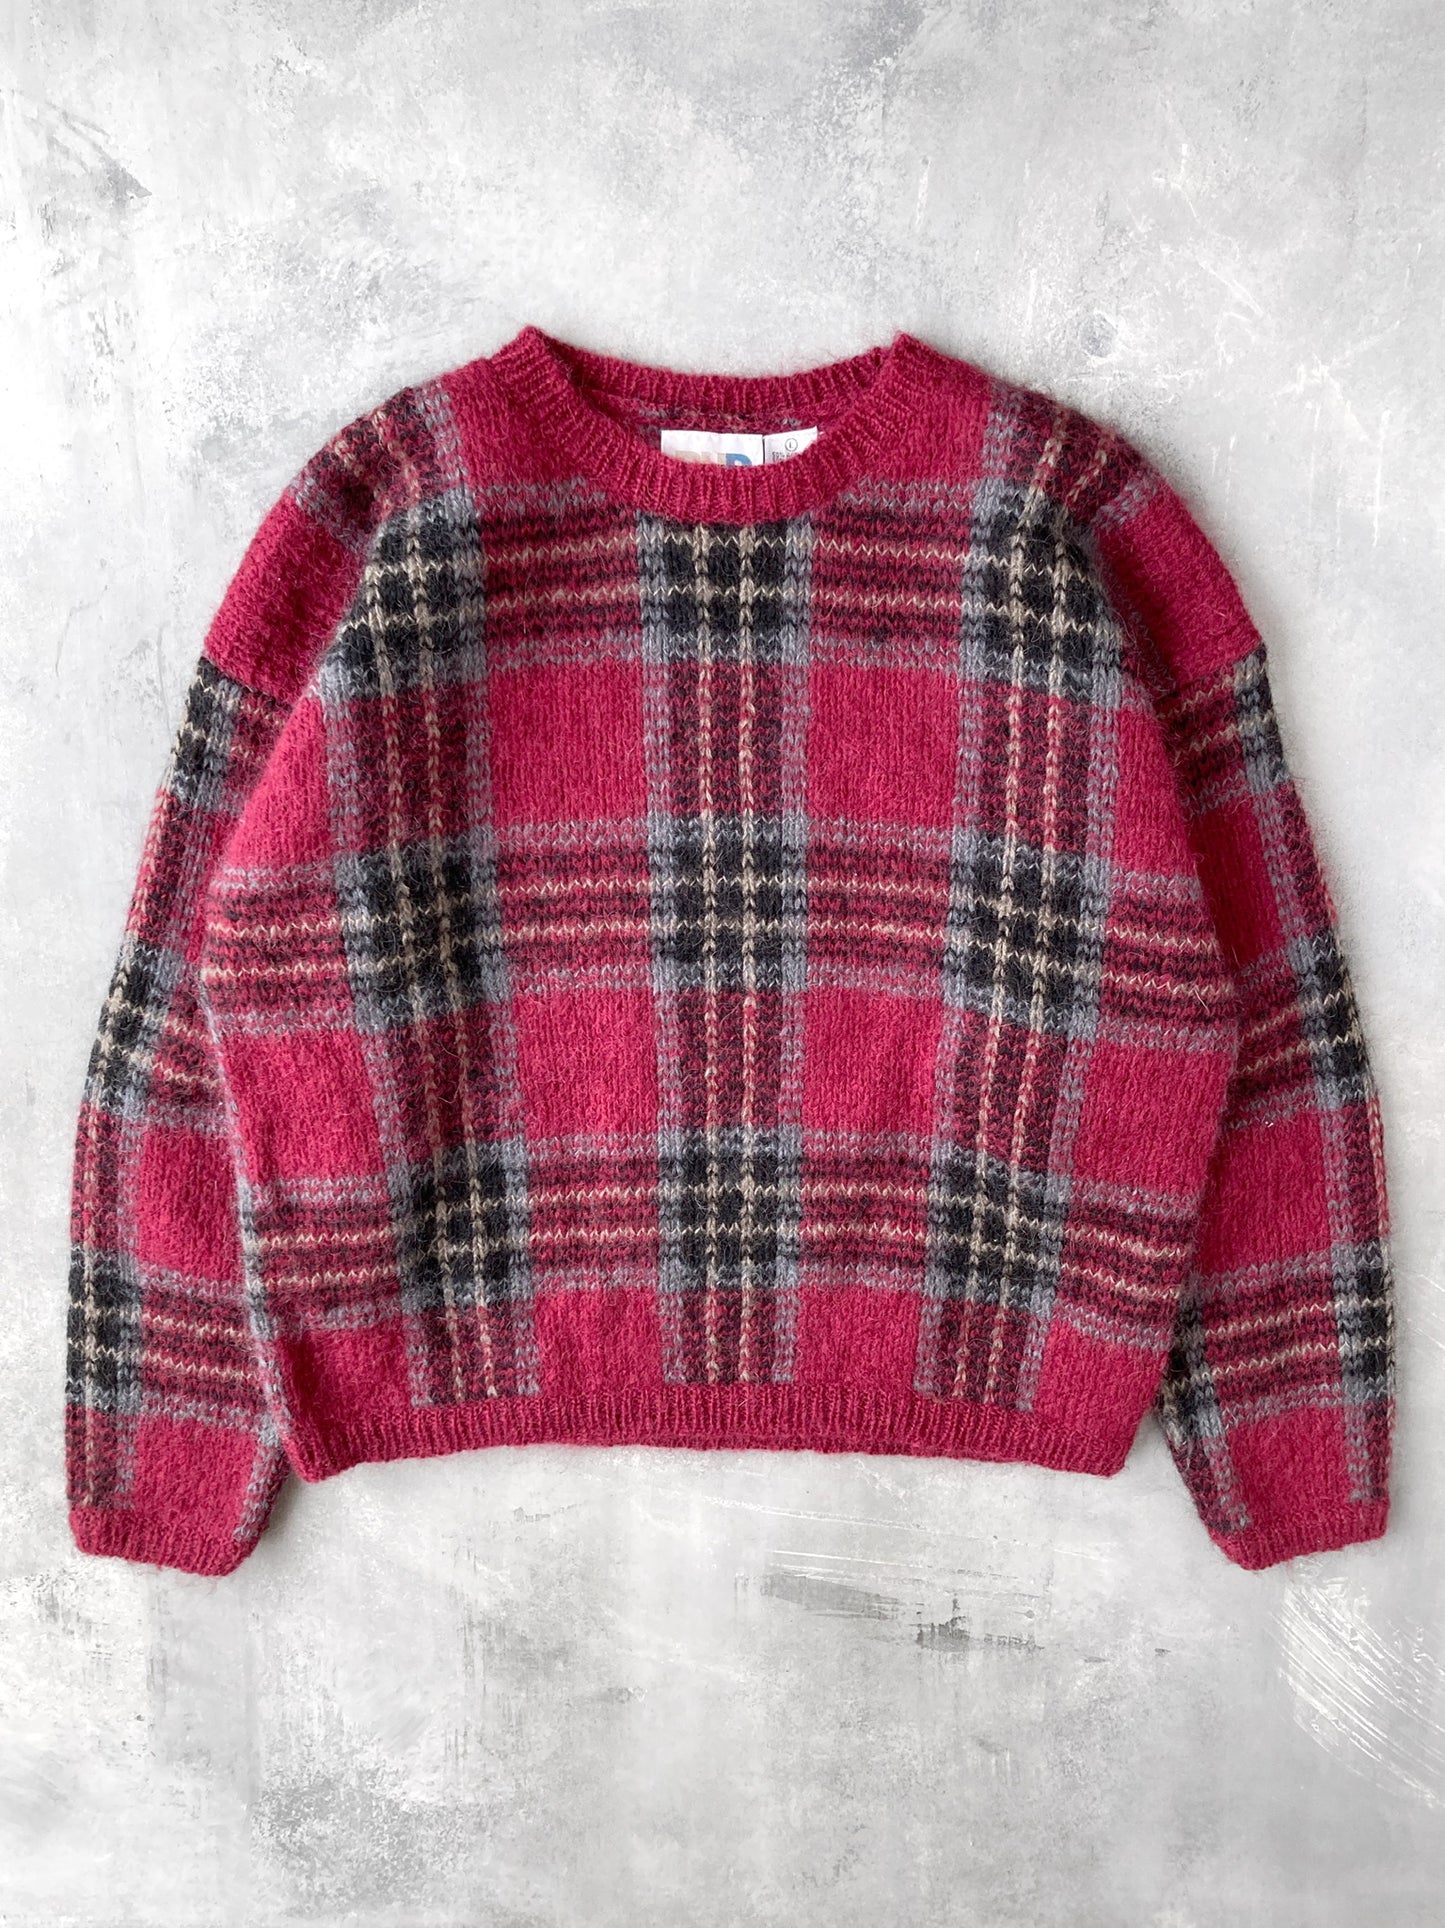 Magenta Plaid Mohair Sweater 90's - Large